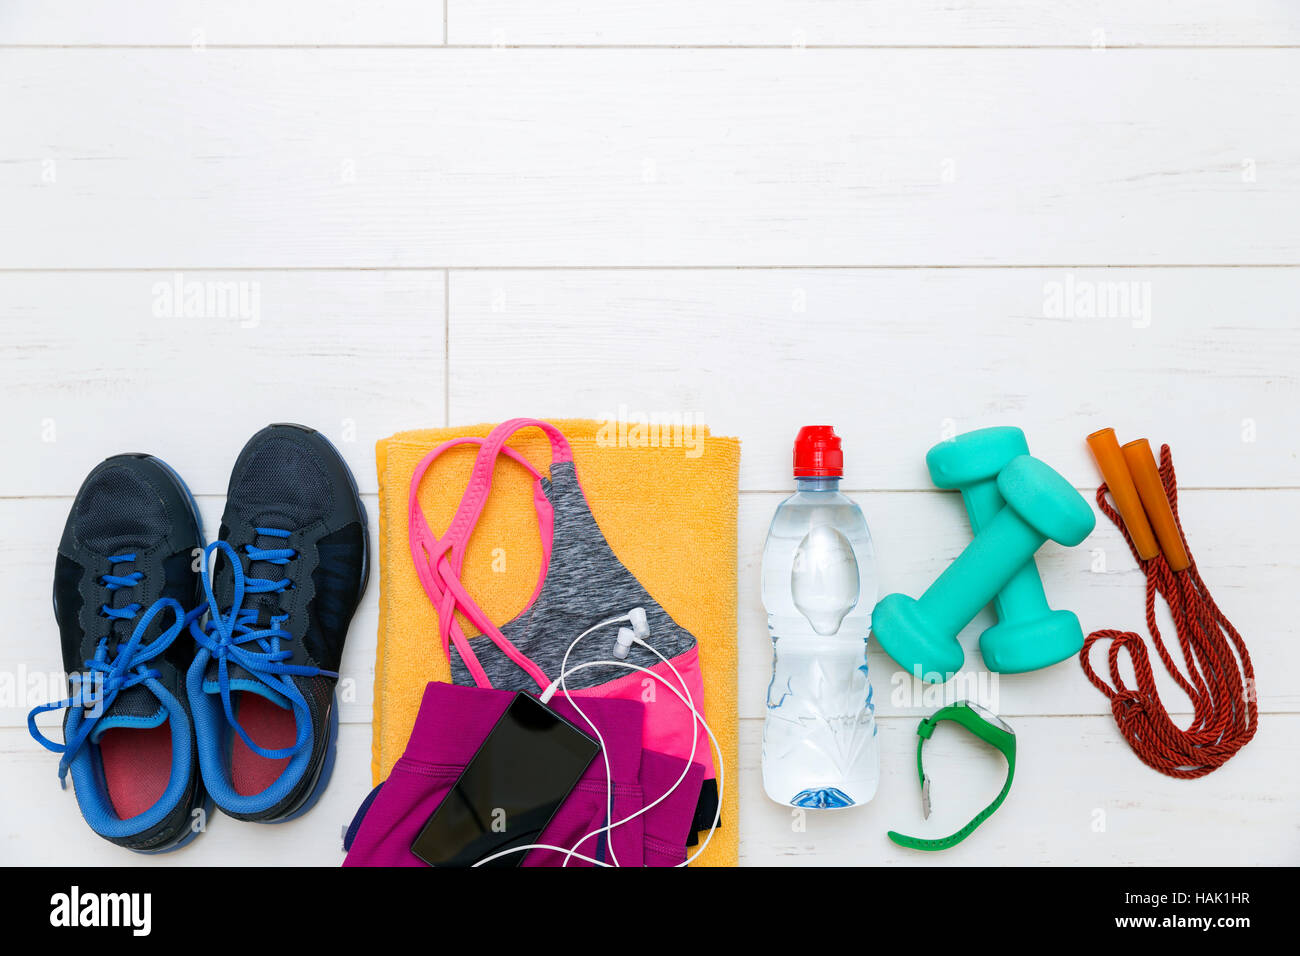 fitness equipment and accessories on white wooden gym floor Stock Photo